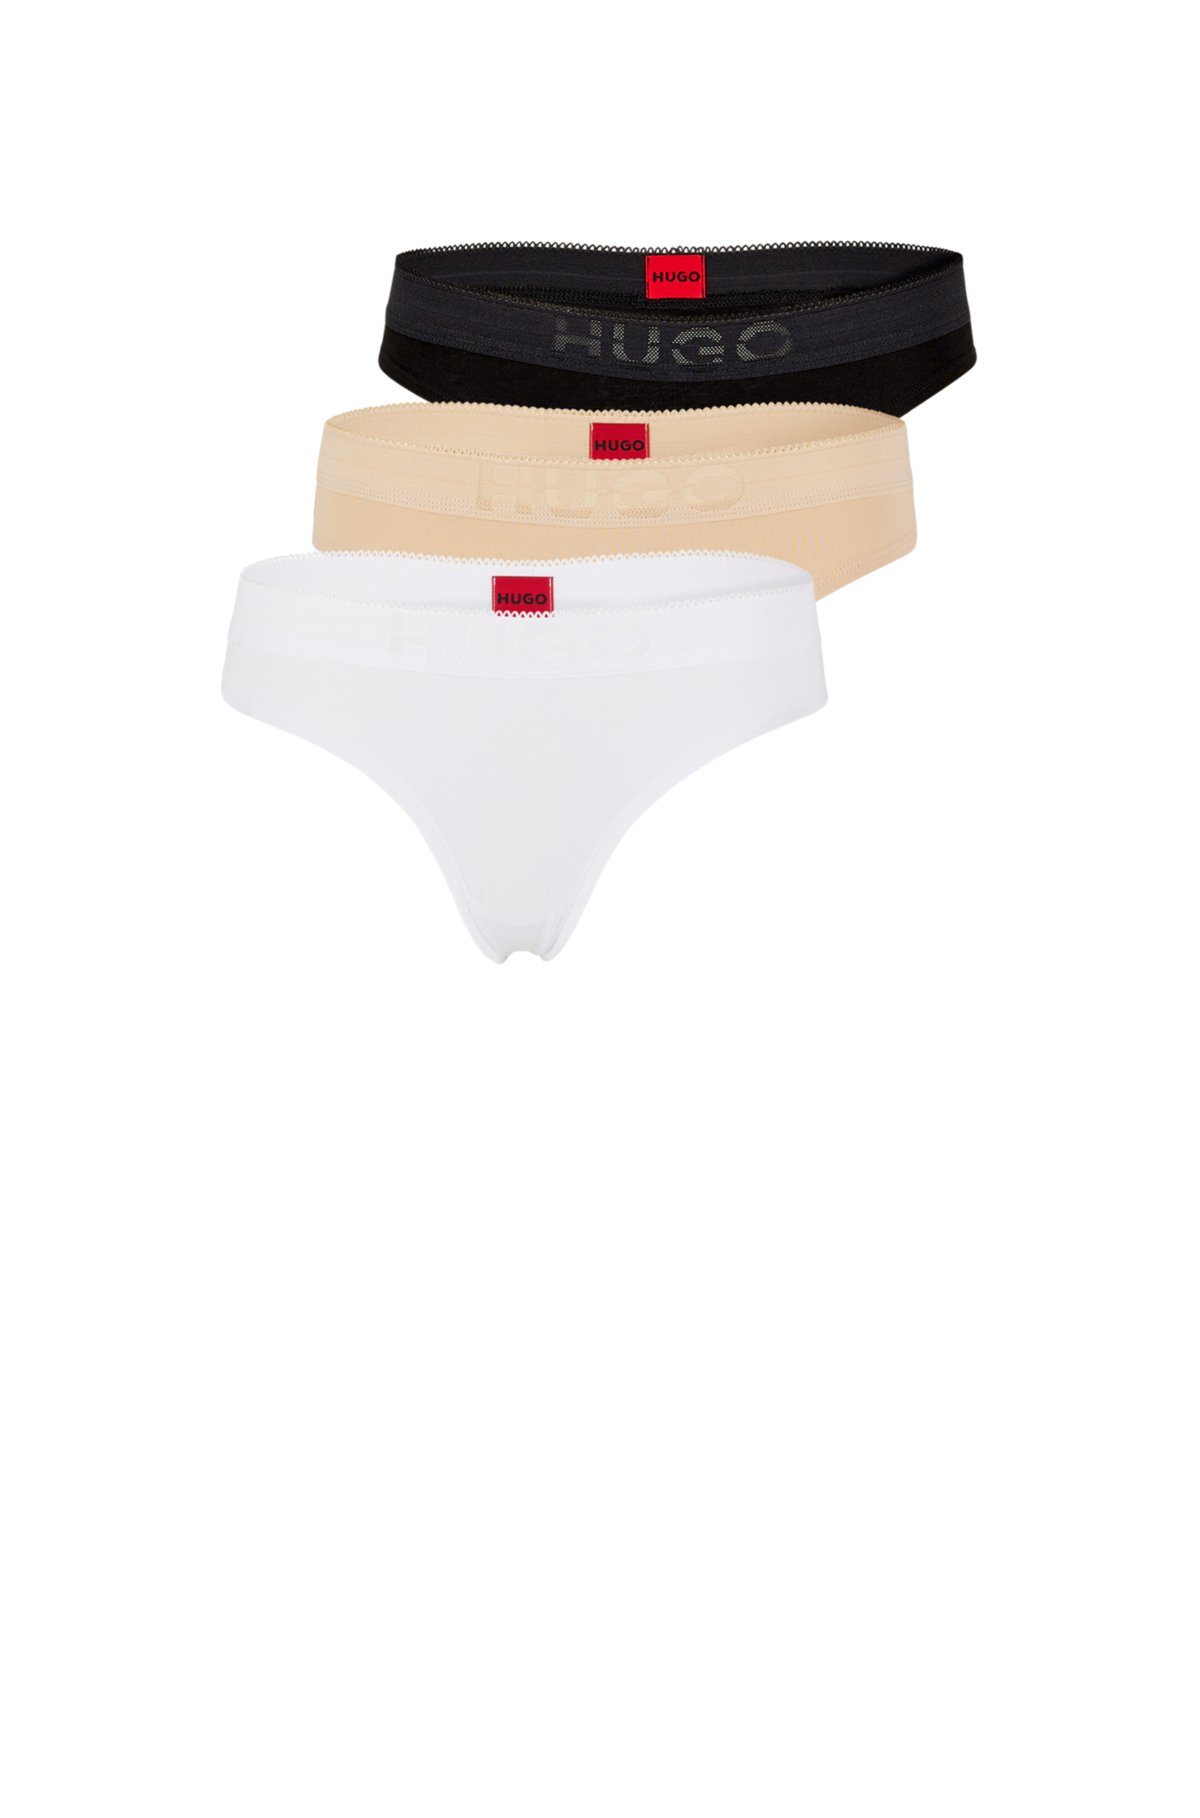 HUGO - Three-pack in cotton of thongs stretch logo